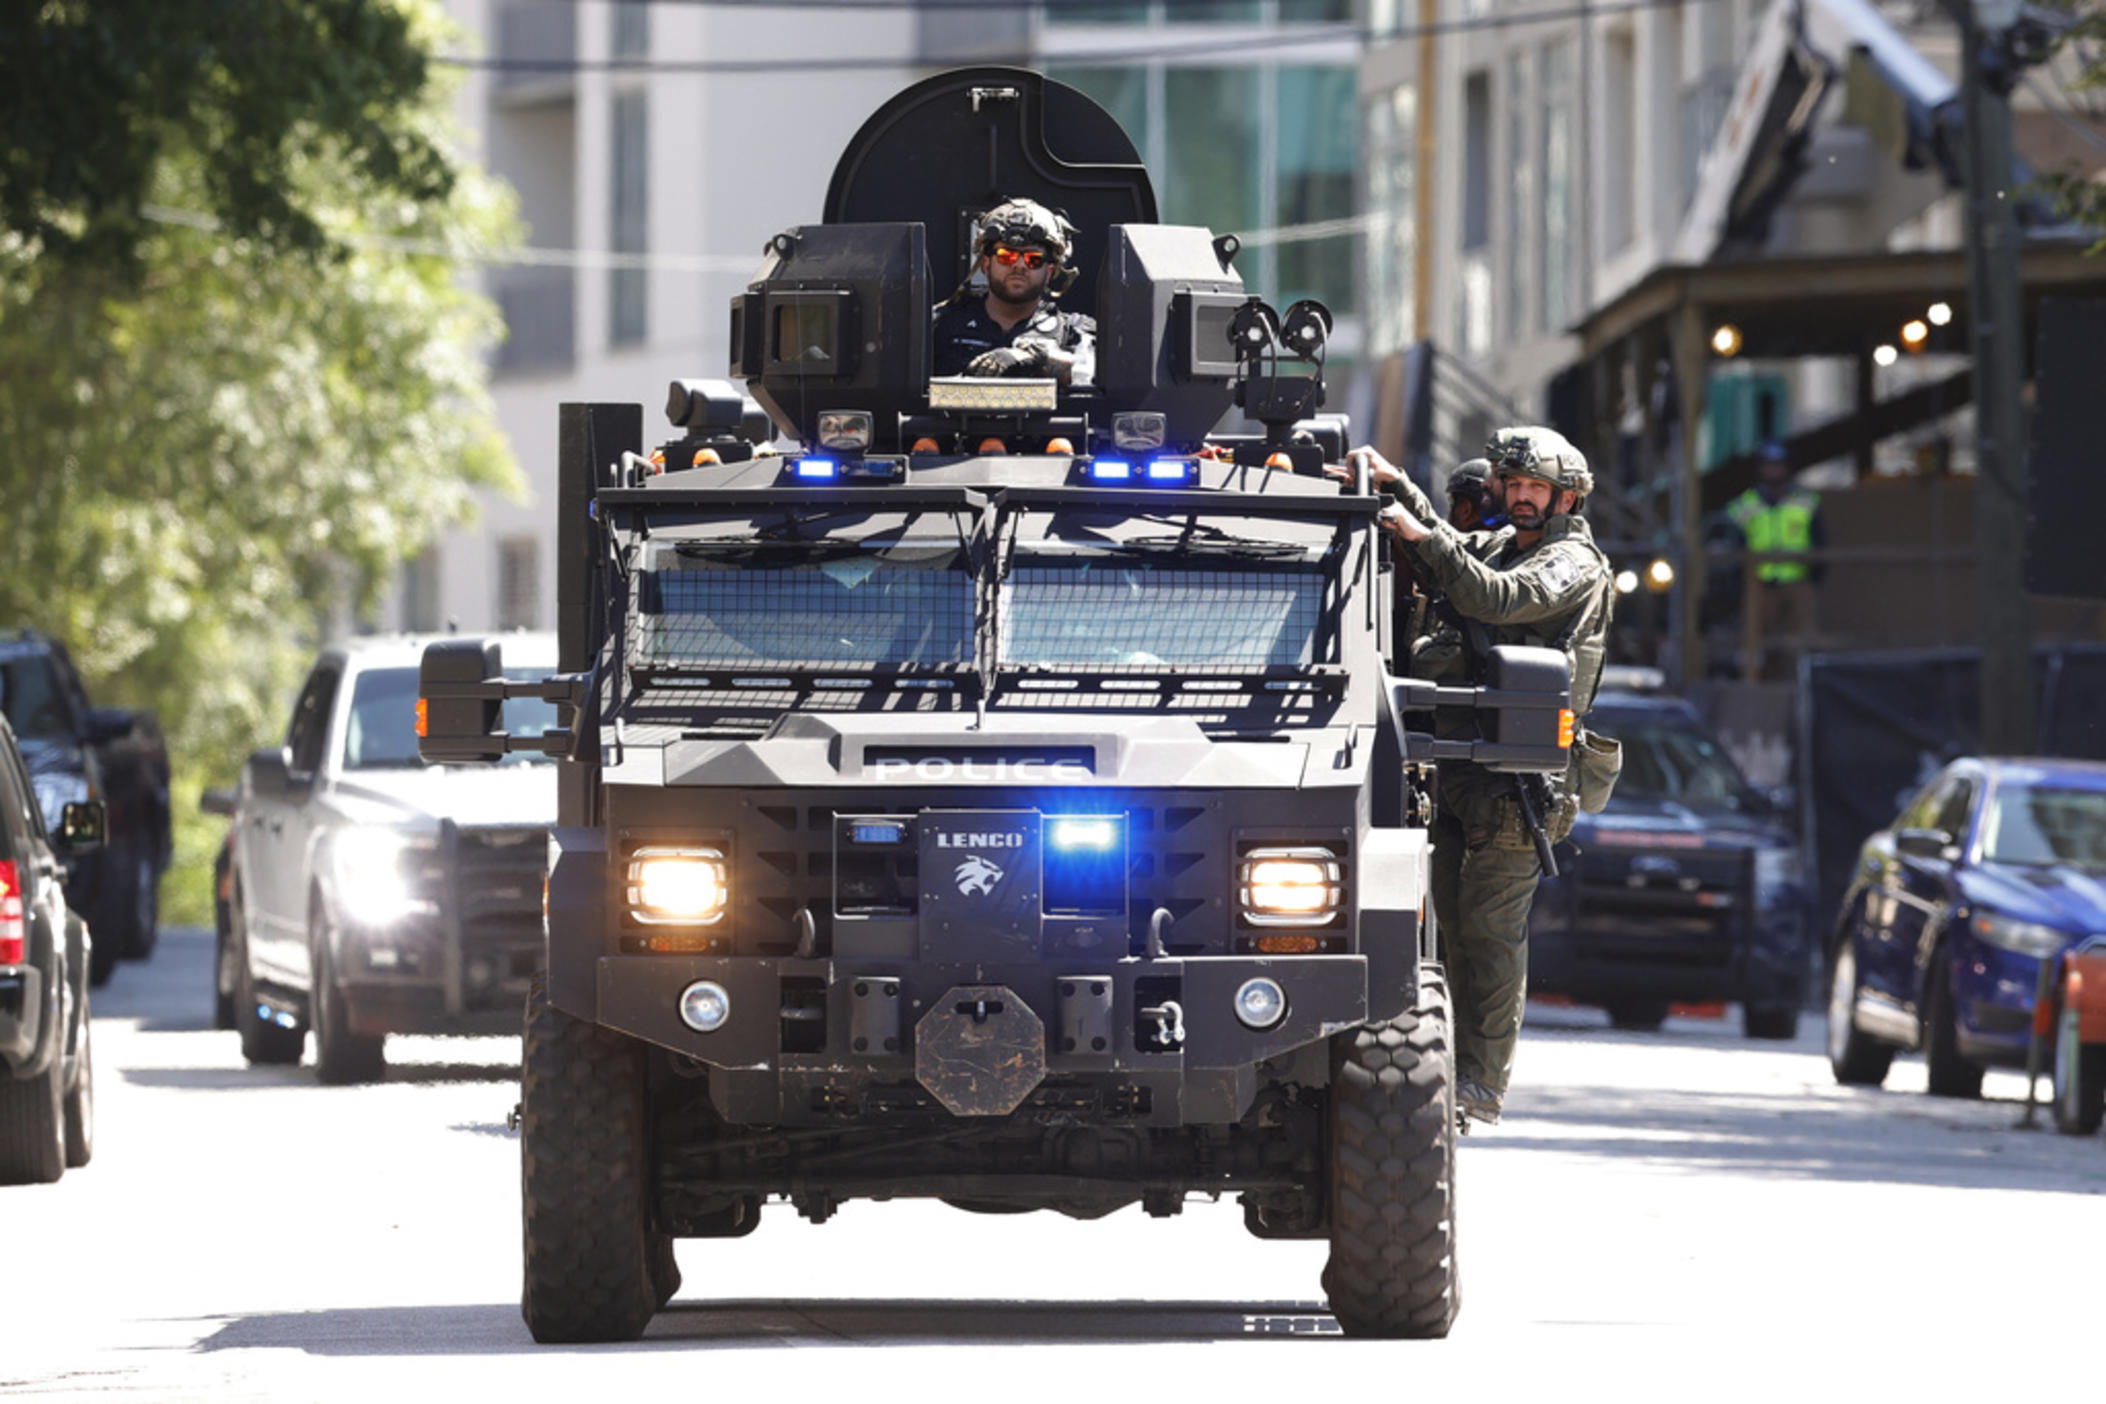 Law enforcement officers arrive near the scene of an active shooter on Wednesday, May 3, 2023 in Atlanta. Atlanta police said there had been no additional shots fired since the initial shooting unfolded inside a building in a commercial area with many office towers and high-rise apartments.